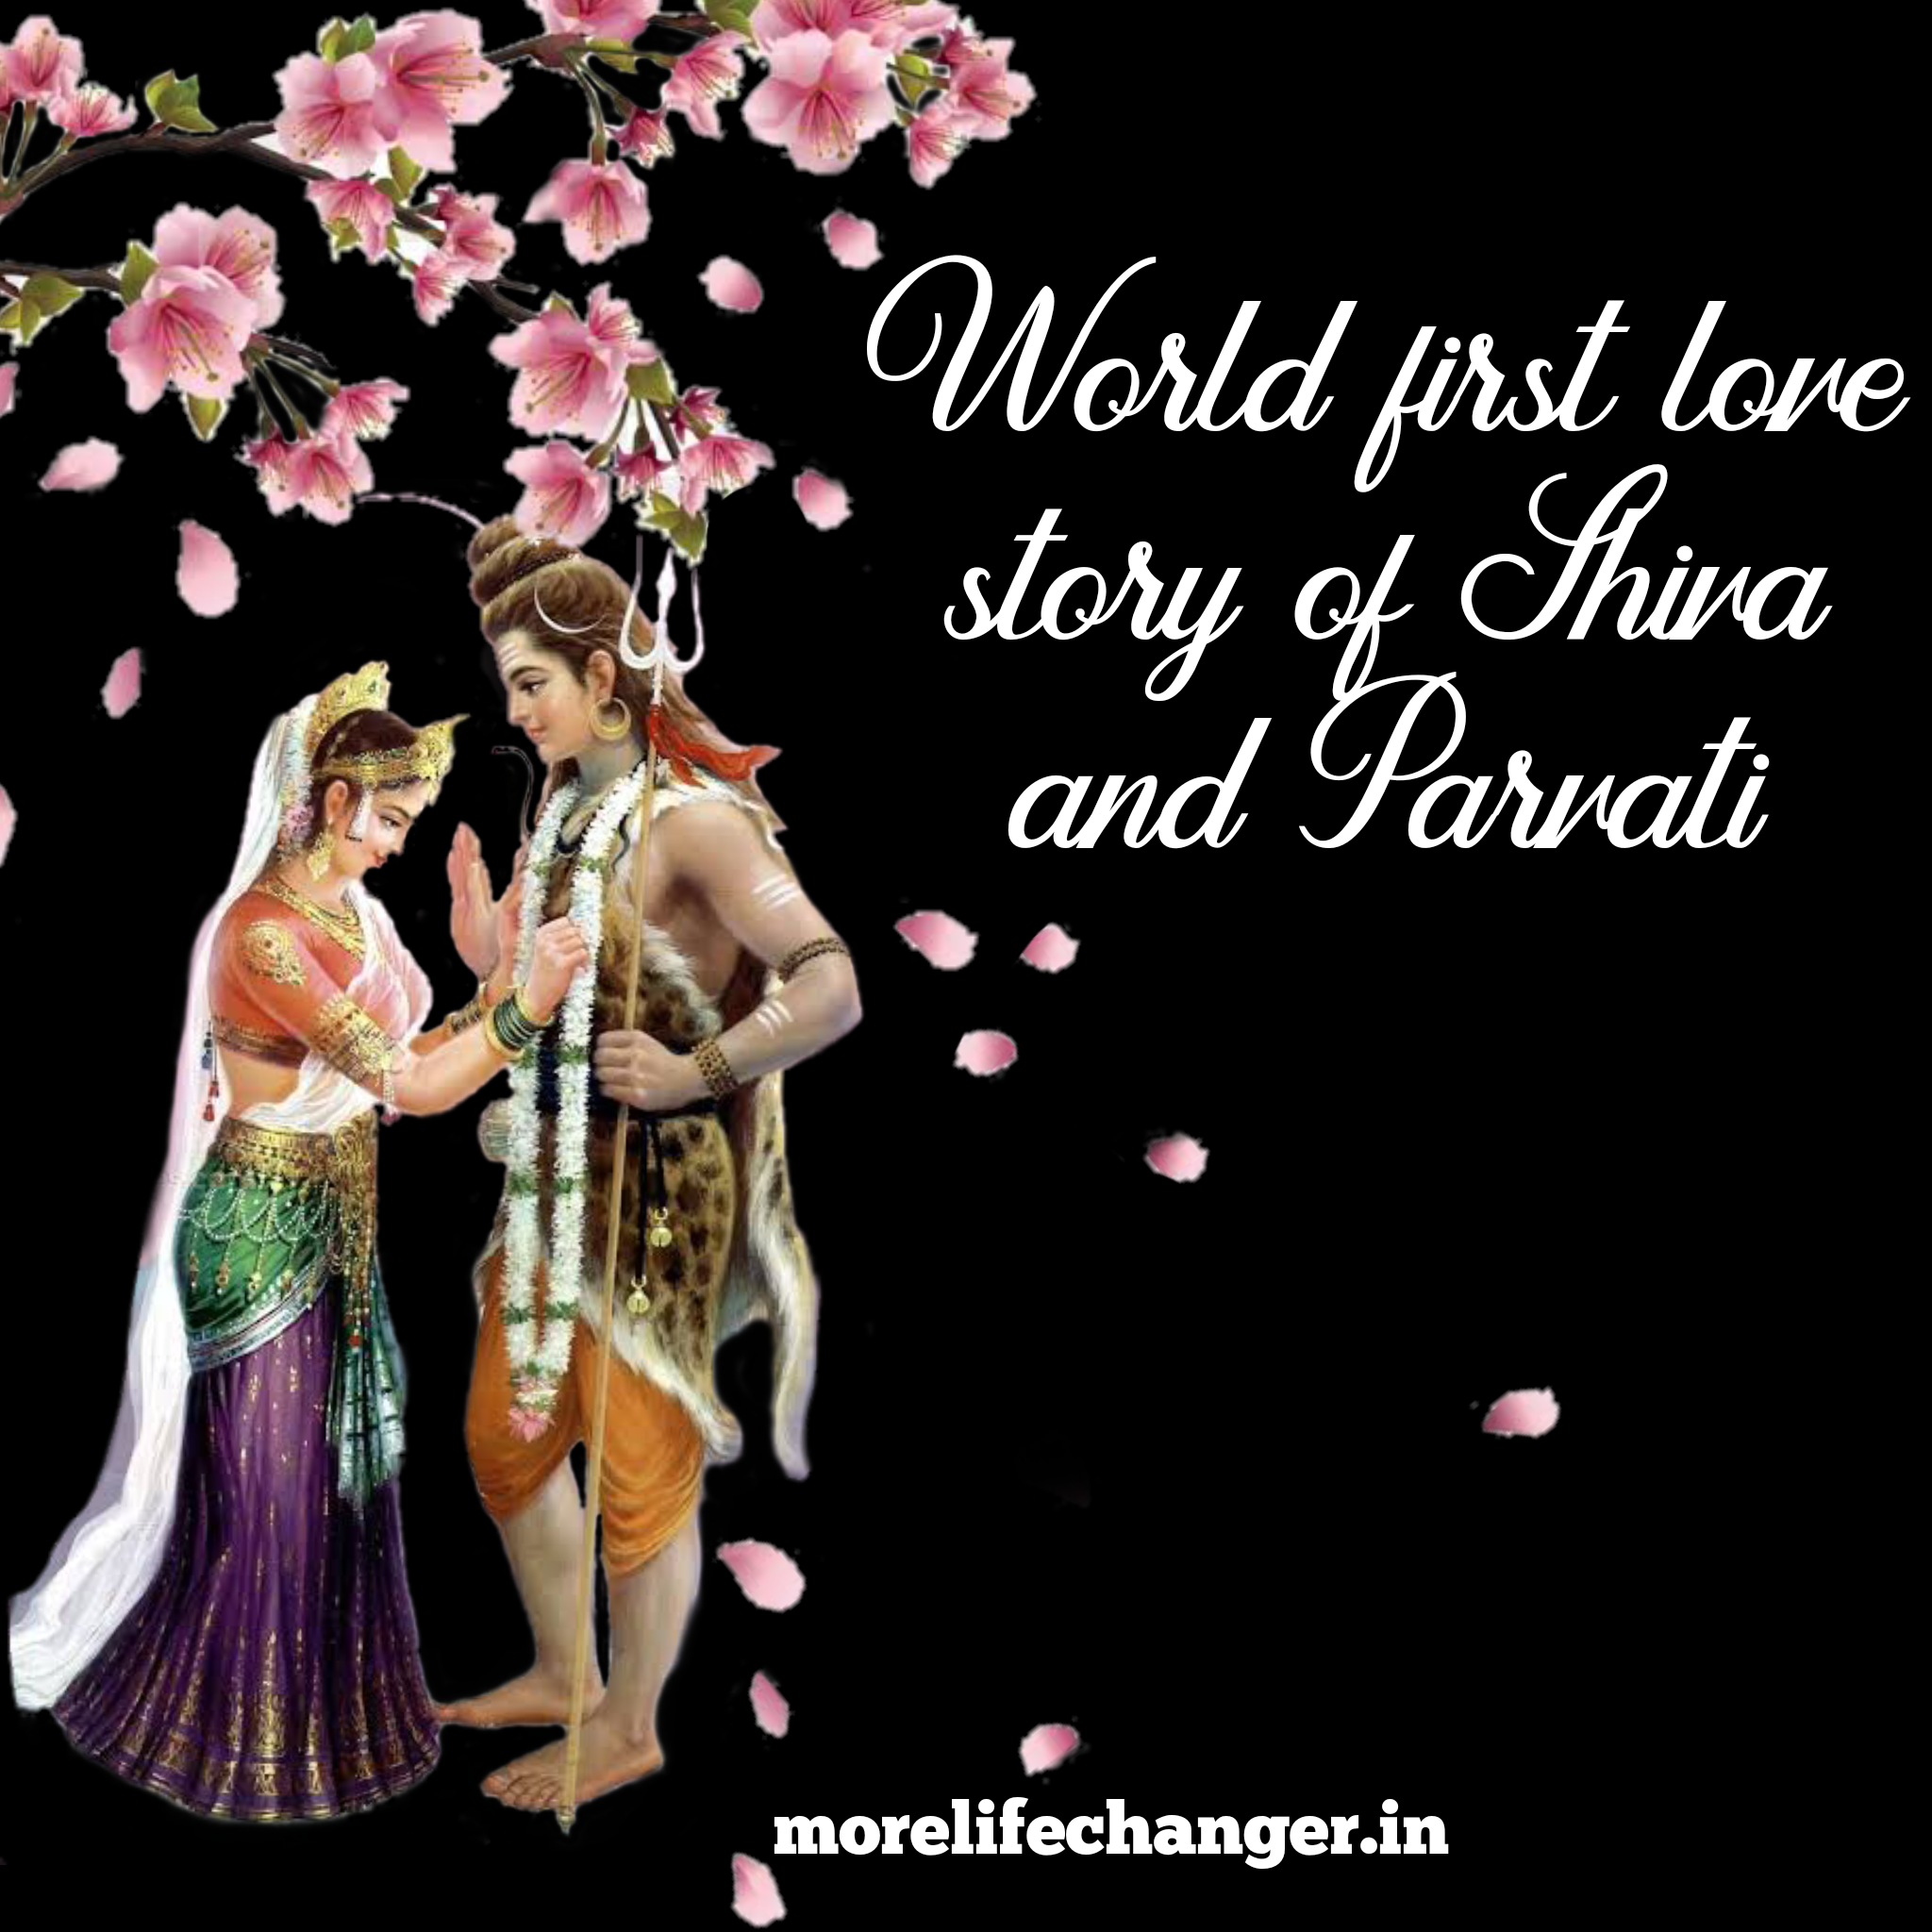 World first love story of Shiv and Parvati